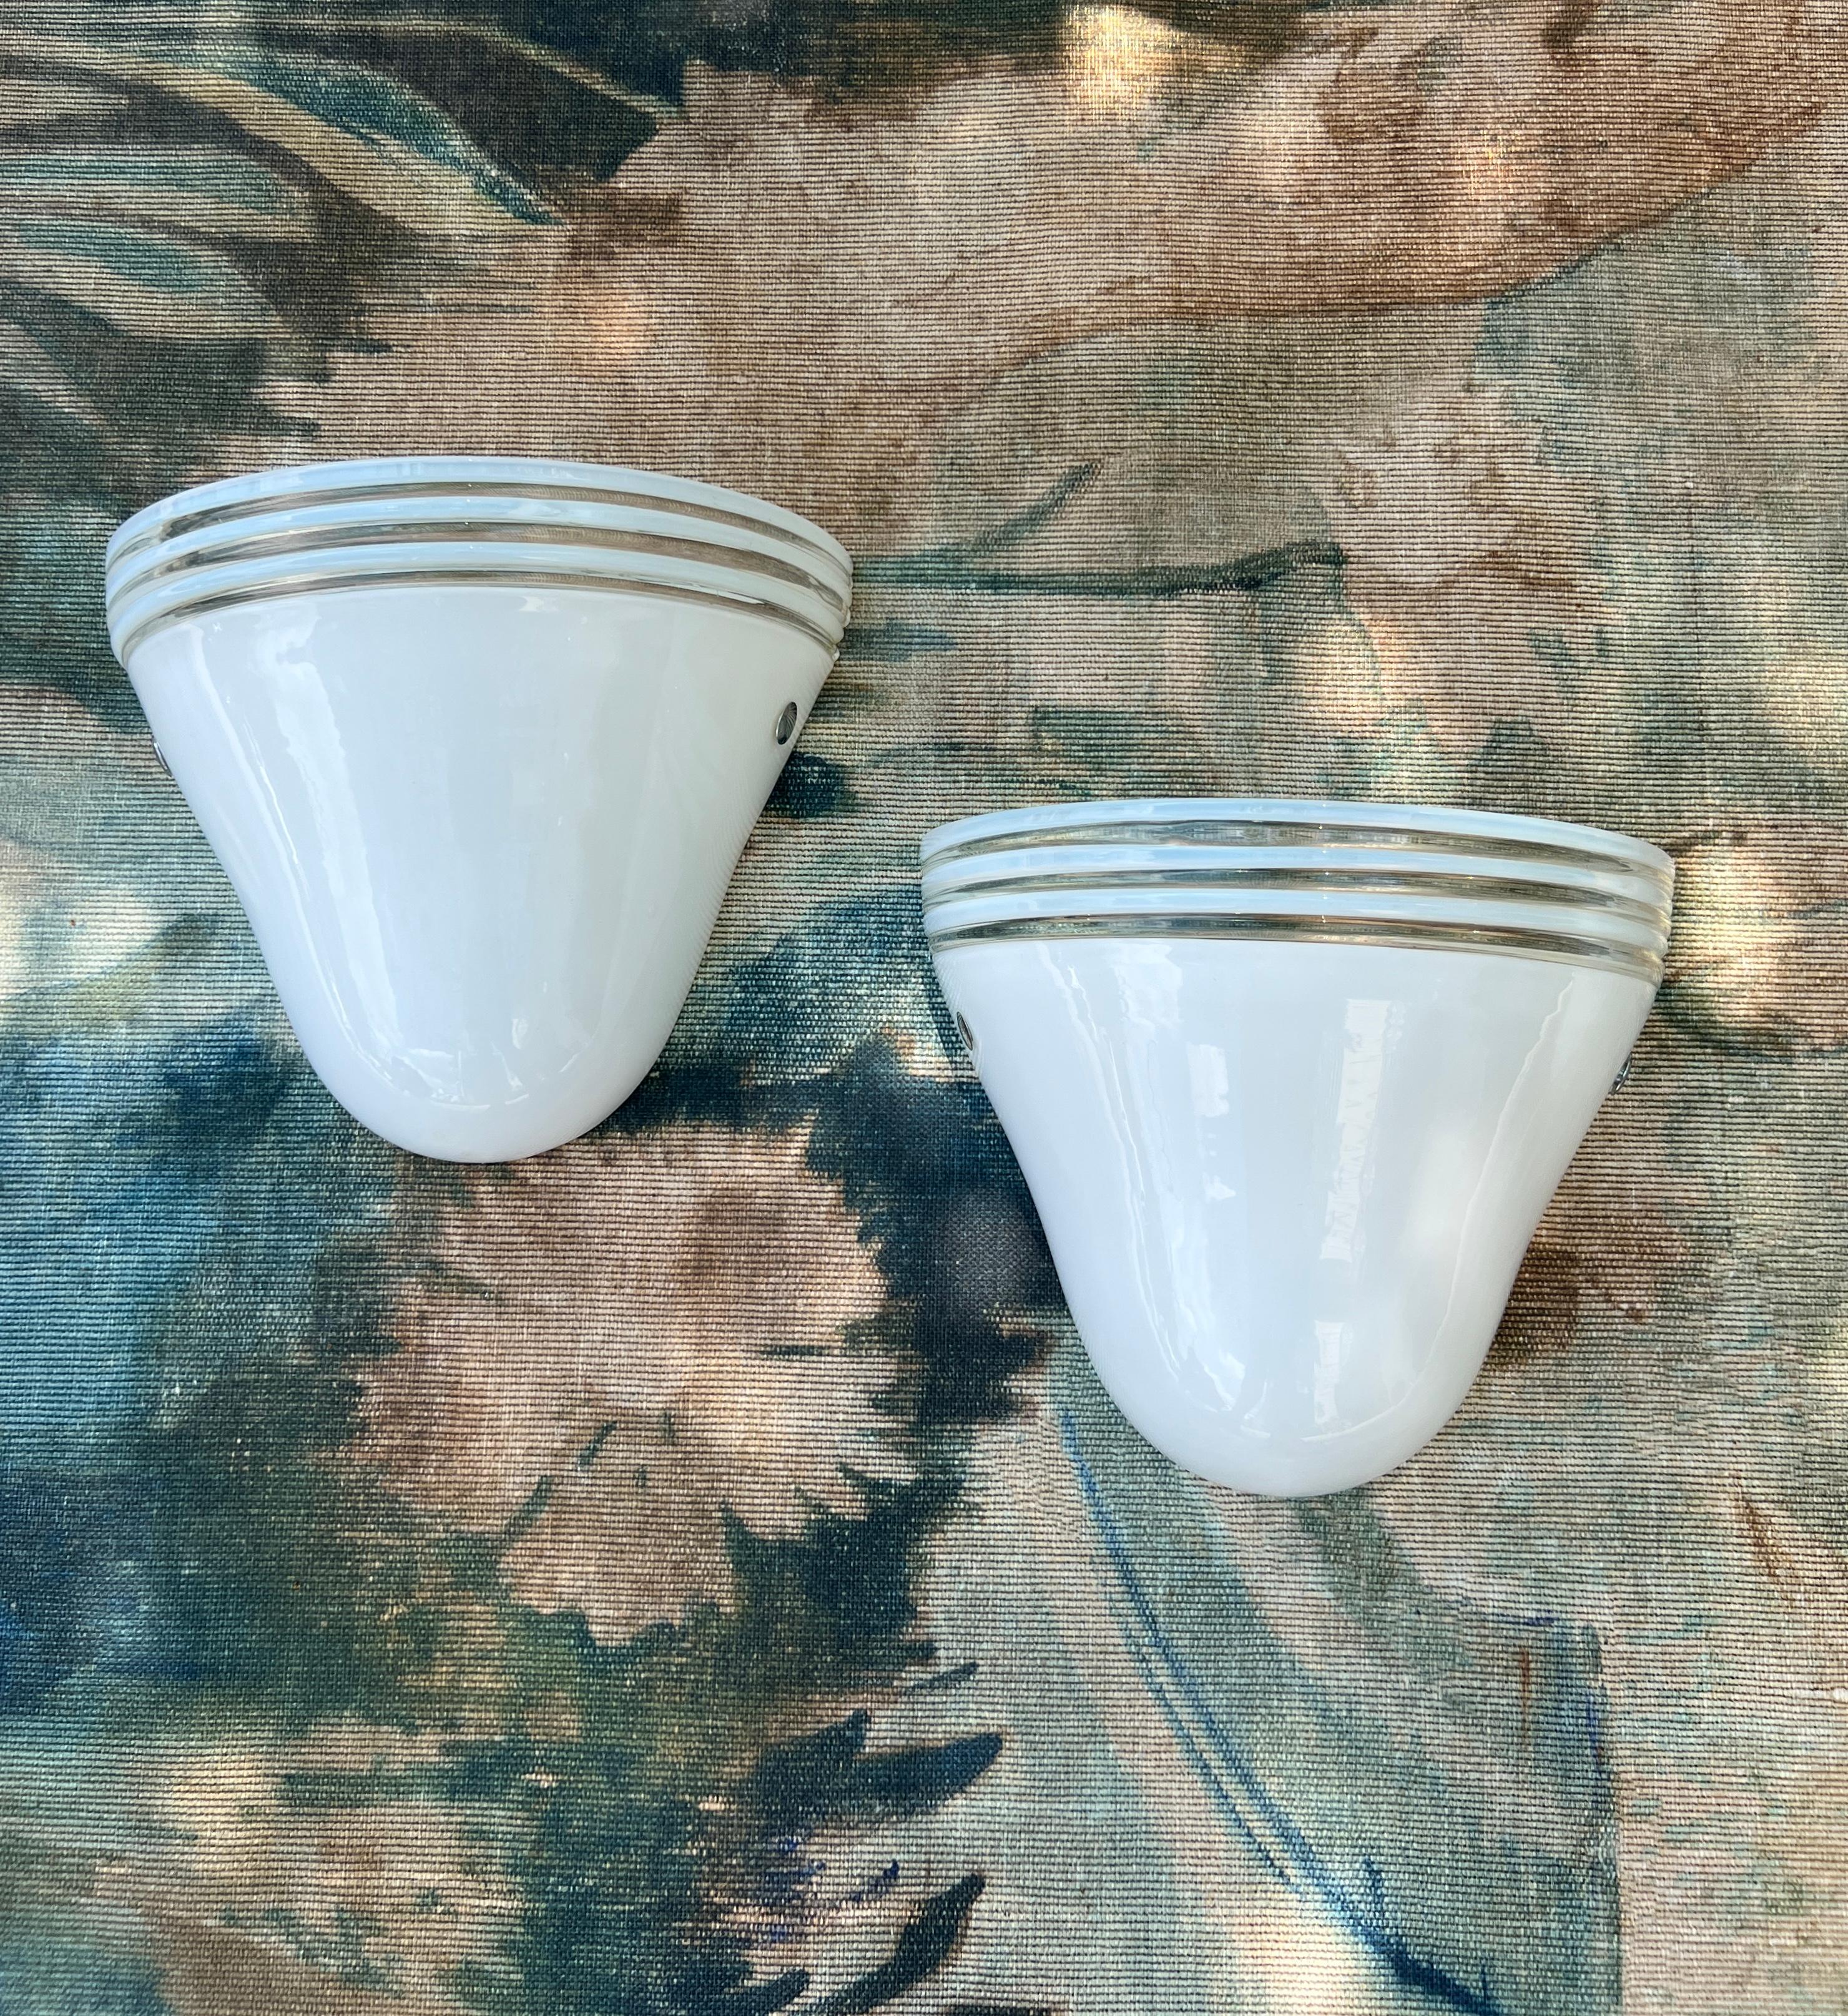 Pair of Mid-Century Modern White Murano Glass Sconces by Leucos, c. 1970s For Sale 2